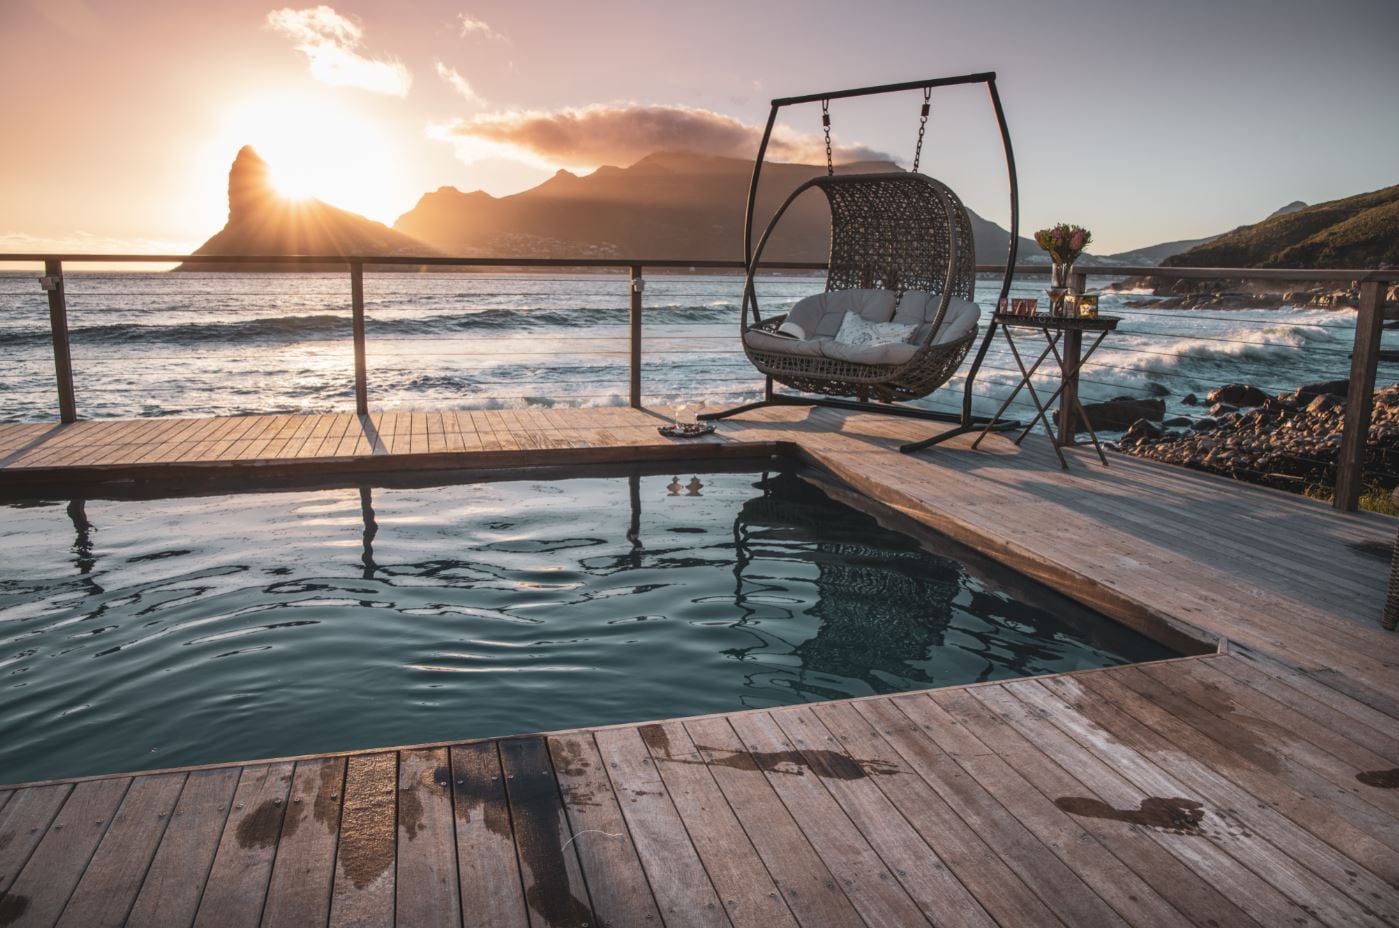 The Ultimate South Africa Honeymoon Guide - JetsetChristina